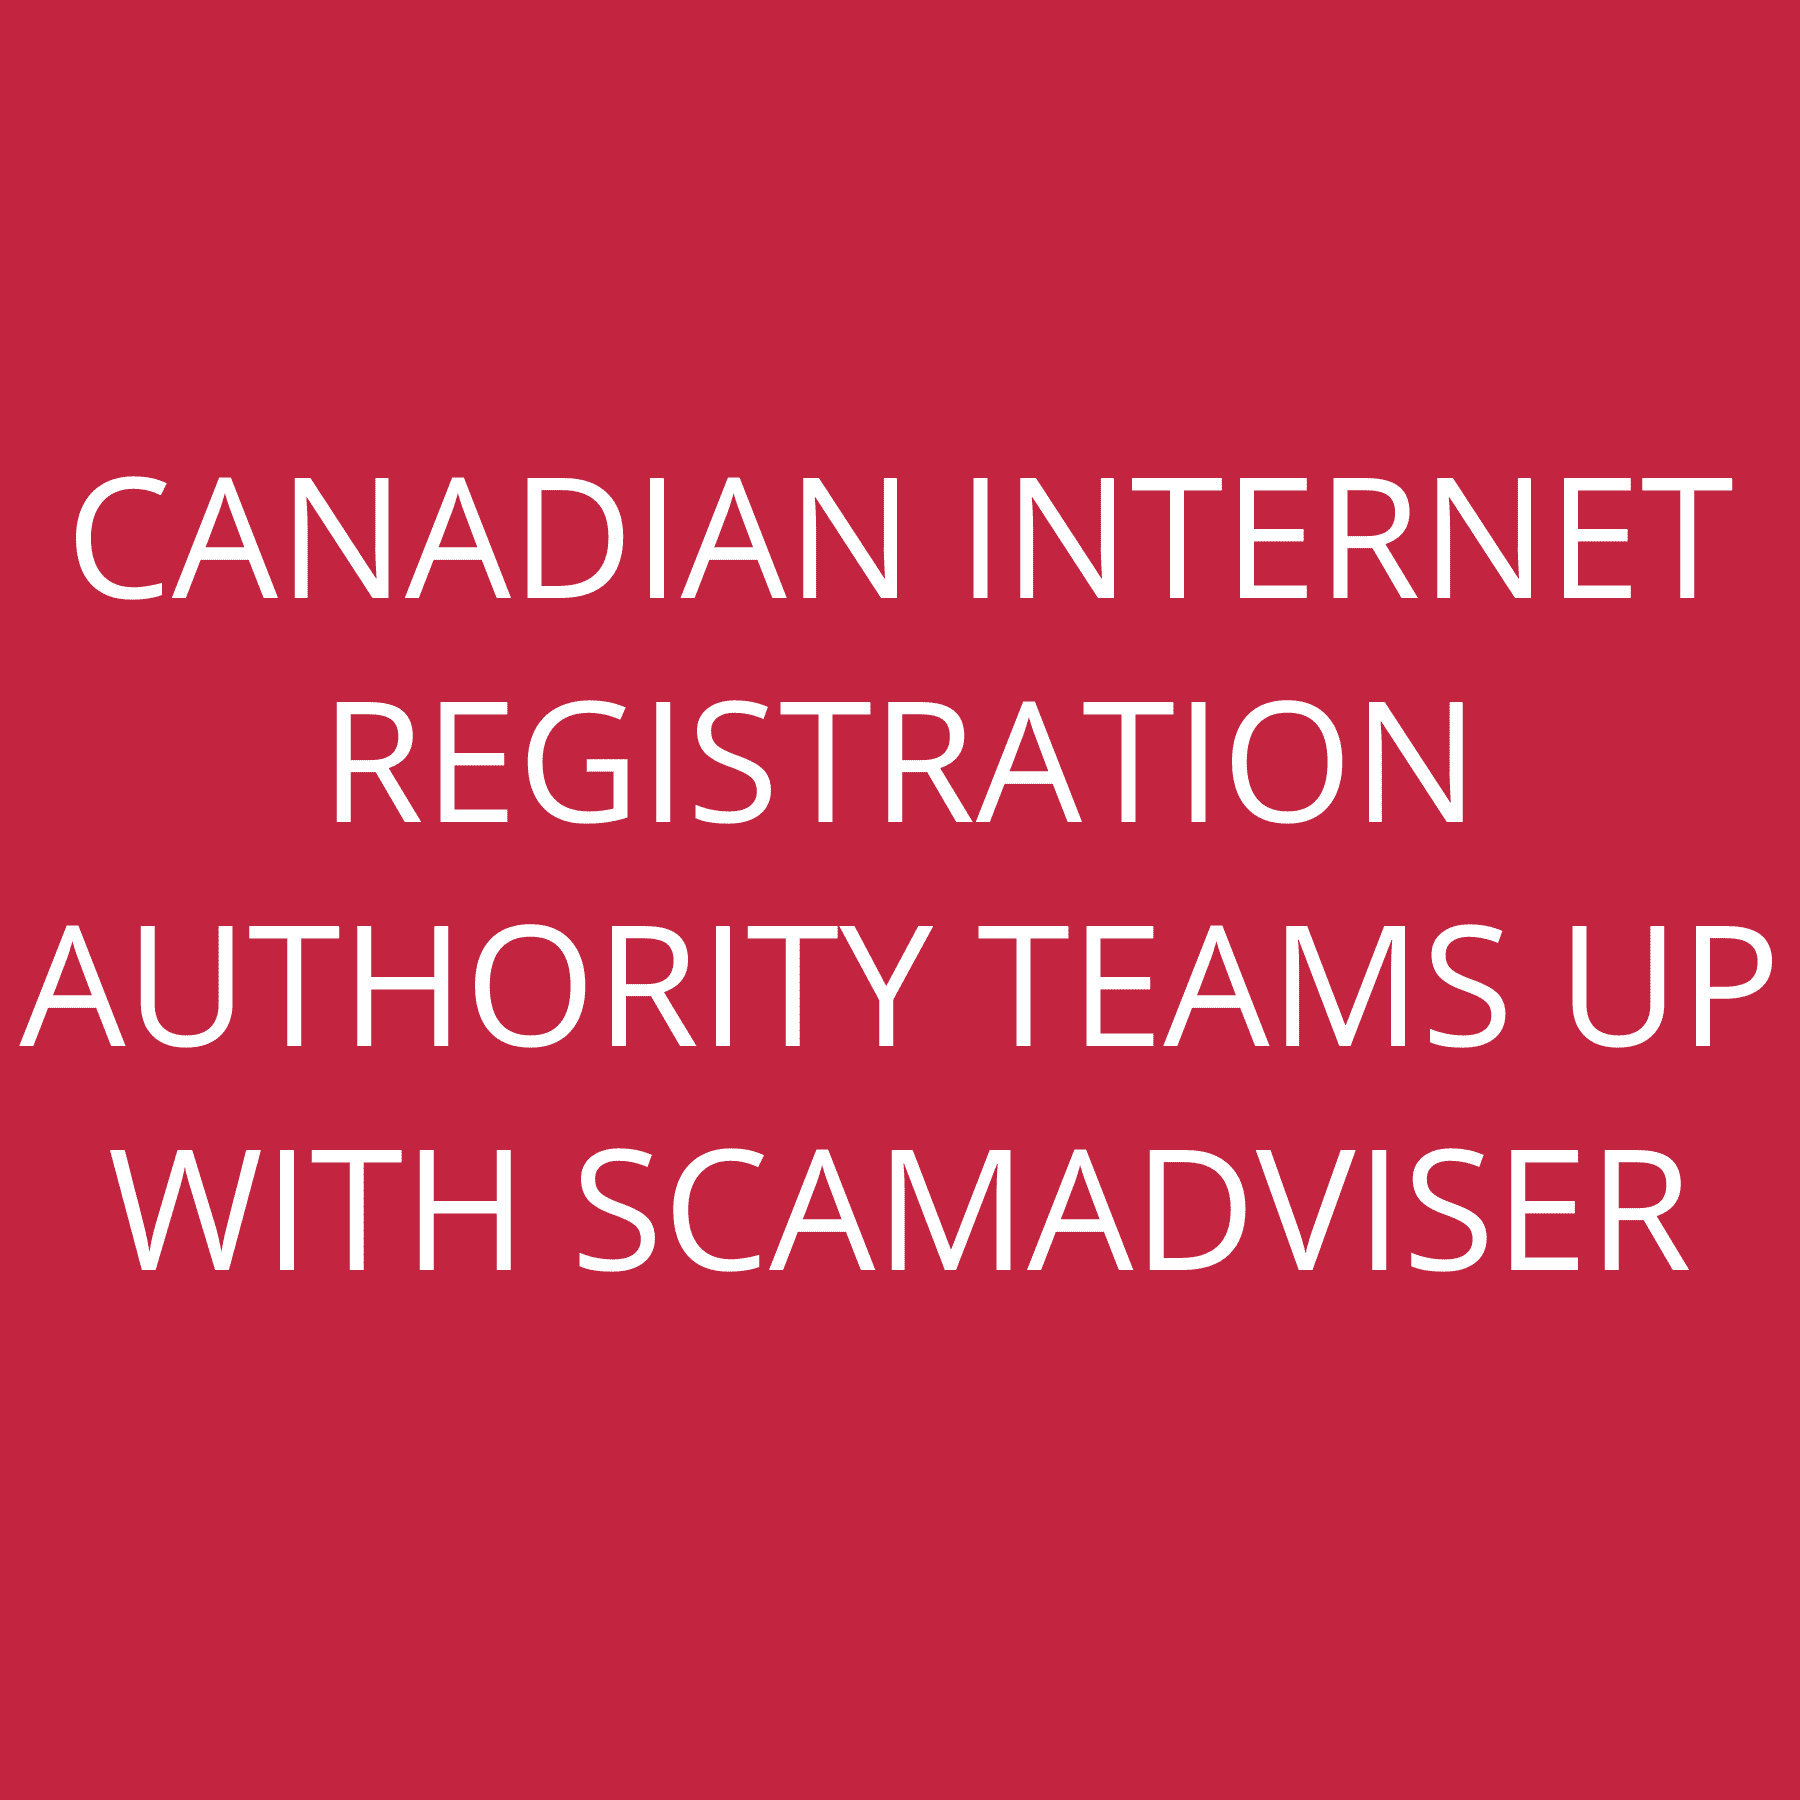 Canadian Internet Registration Authority teams Up with ScamAdviser